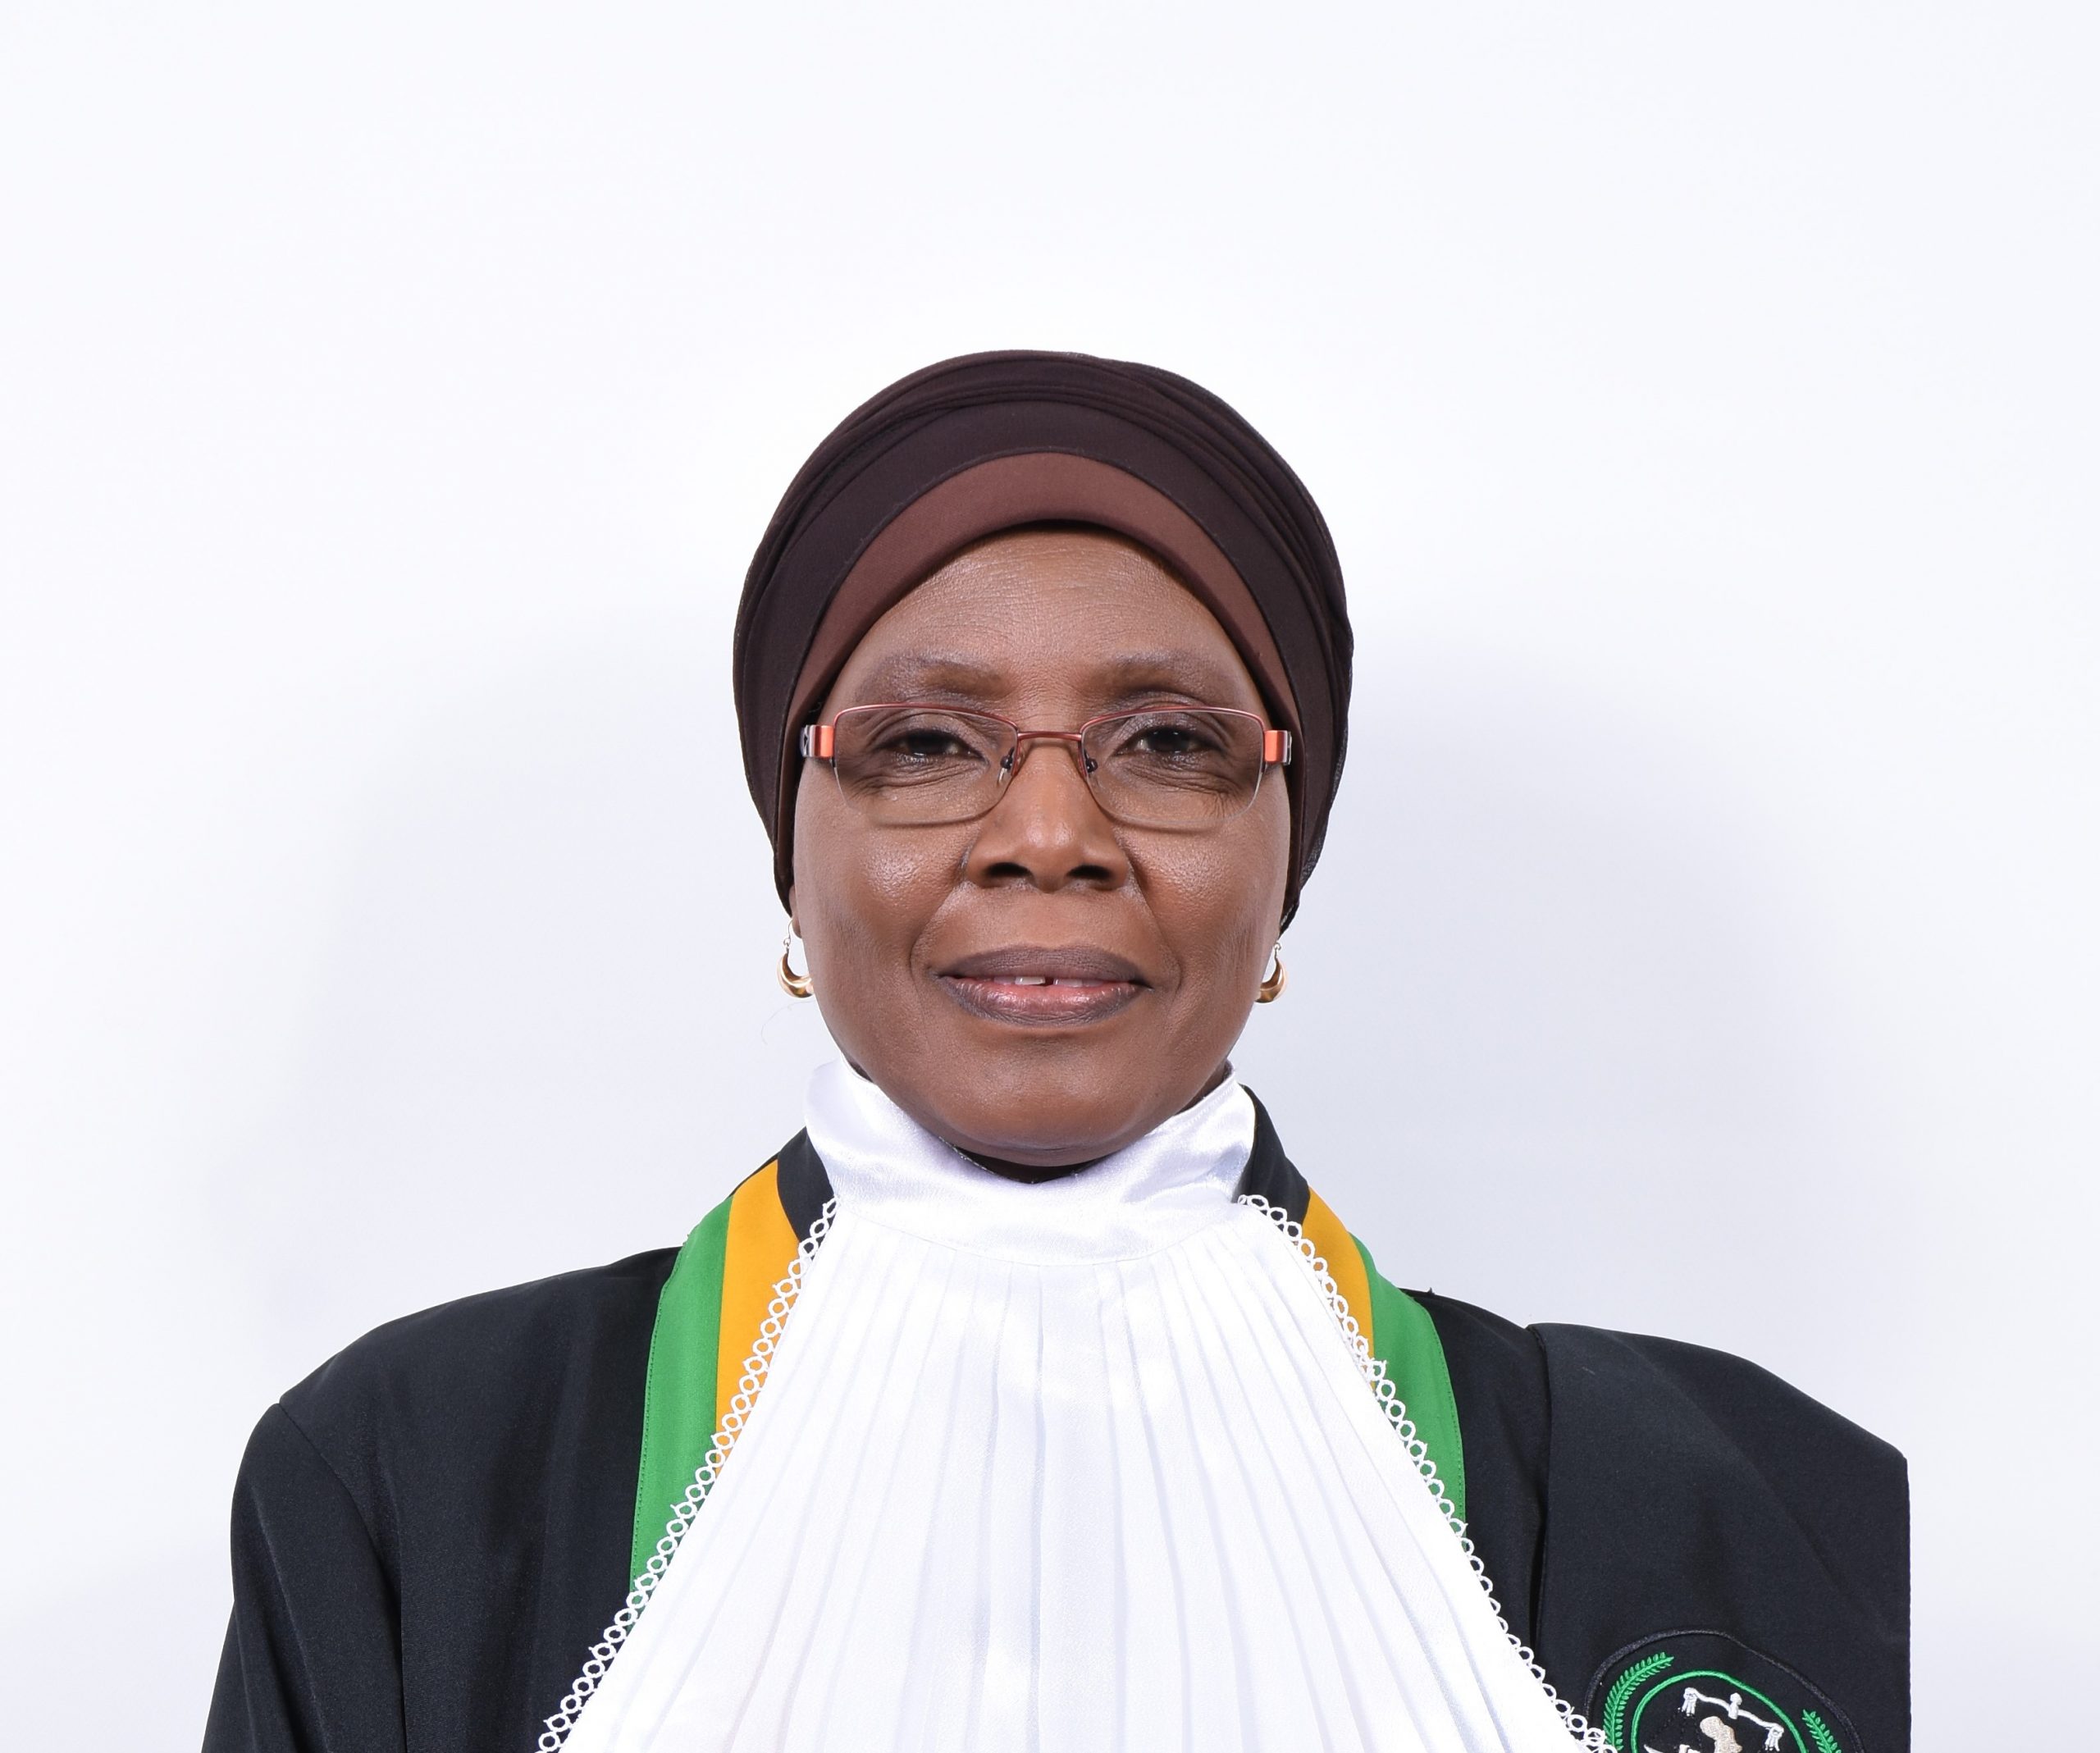 SPEECH BY HON. LADY JUSTICE IMANI D. ABOUD, PRESIDENT OF THE AFRICAN COURT ON HUMAN AND PEOPLES’ RIGHTS ON THE     OCCASION OF THE OPENING OF THE 2023 JUDICIAL YEAR OF THE AFRICAN COURT